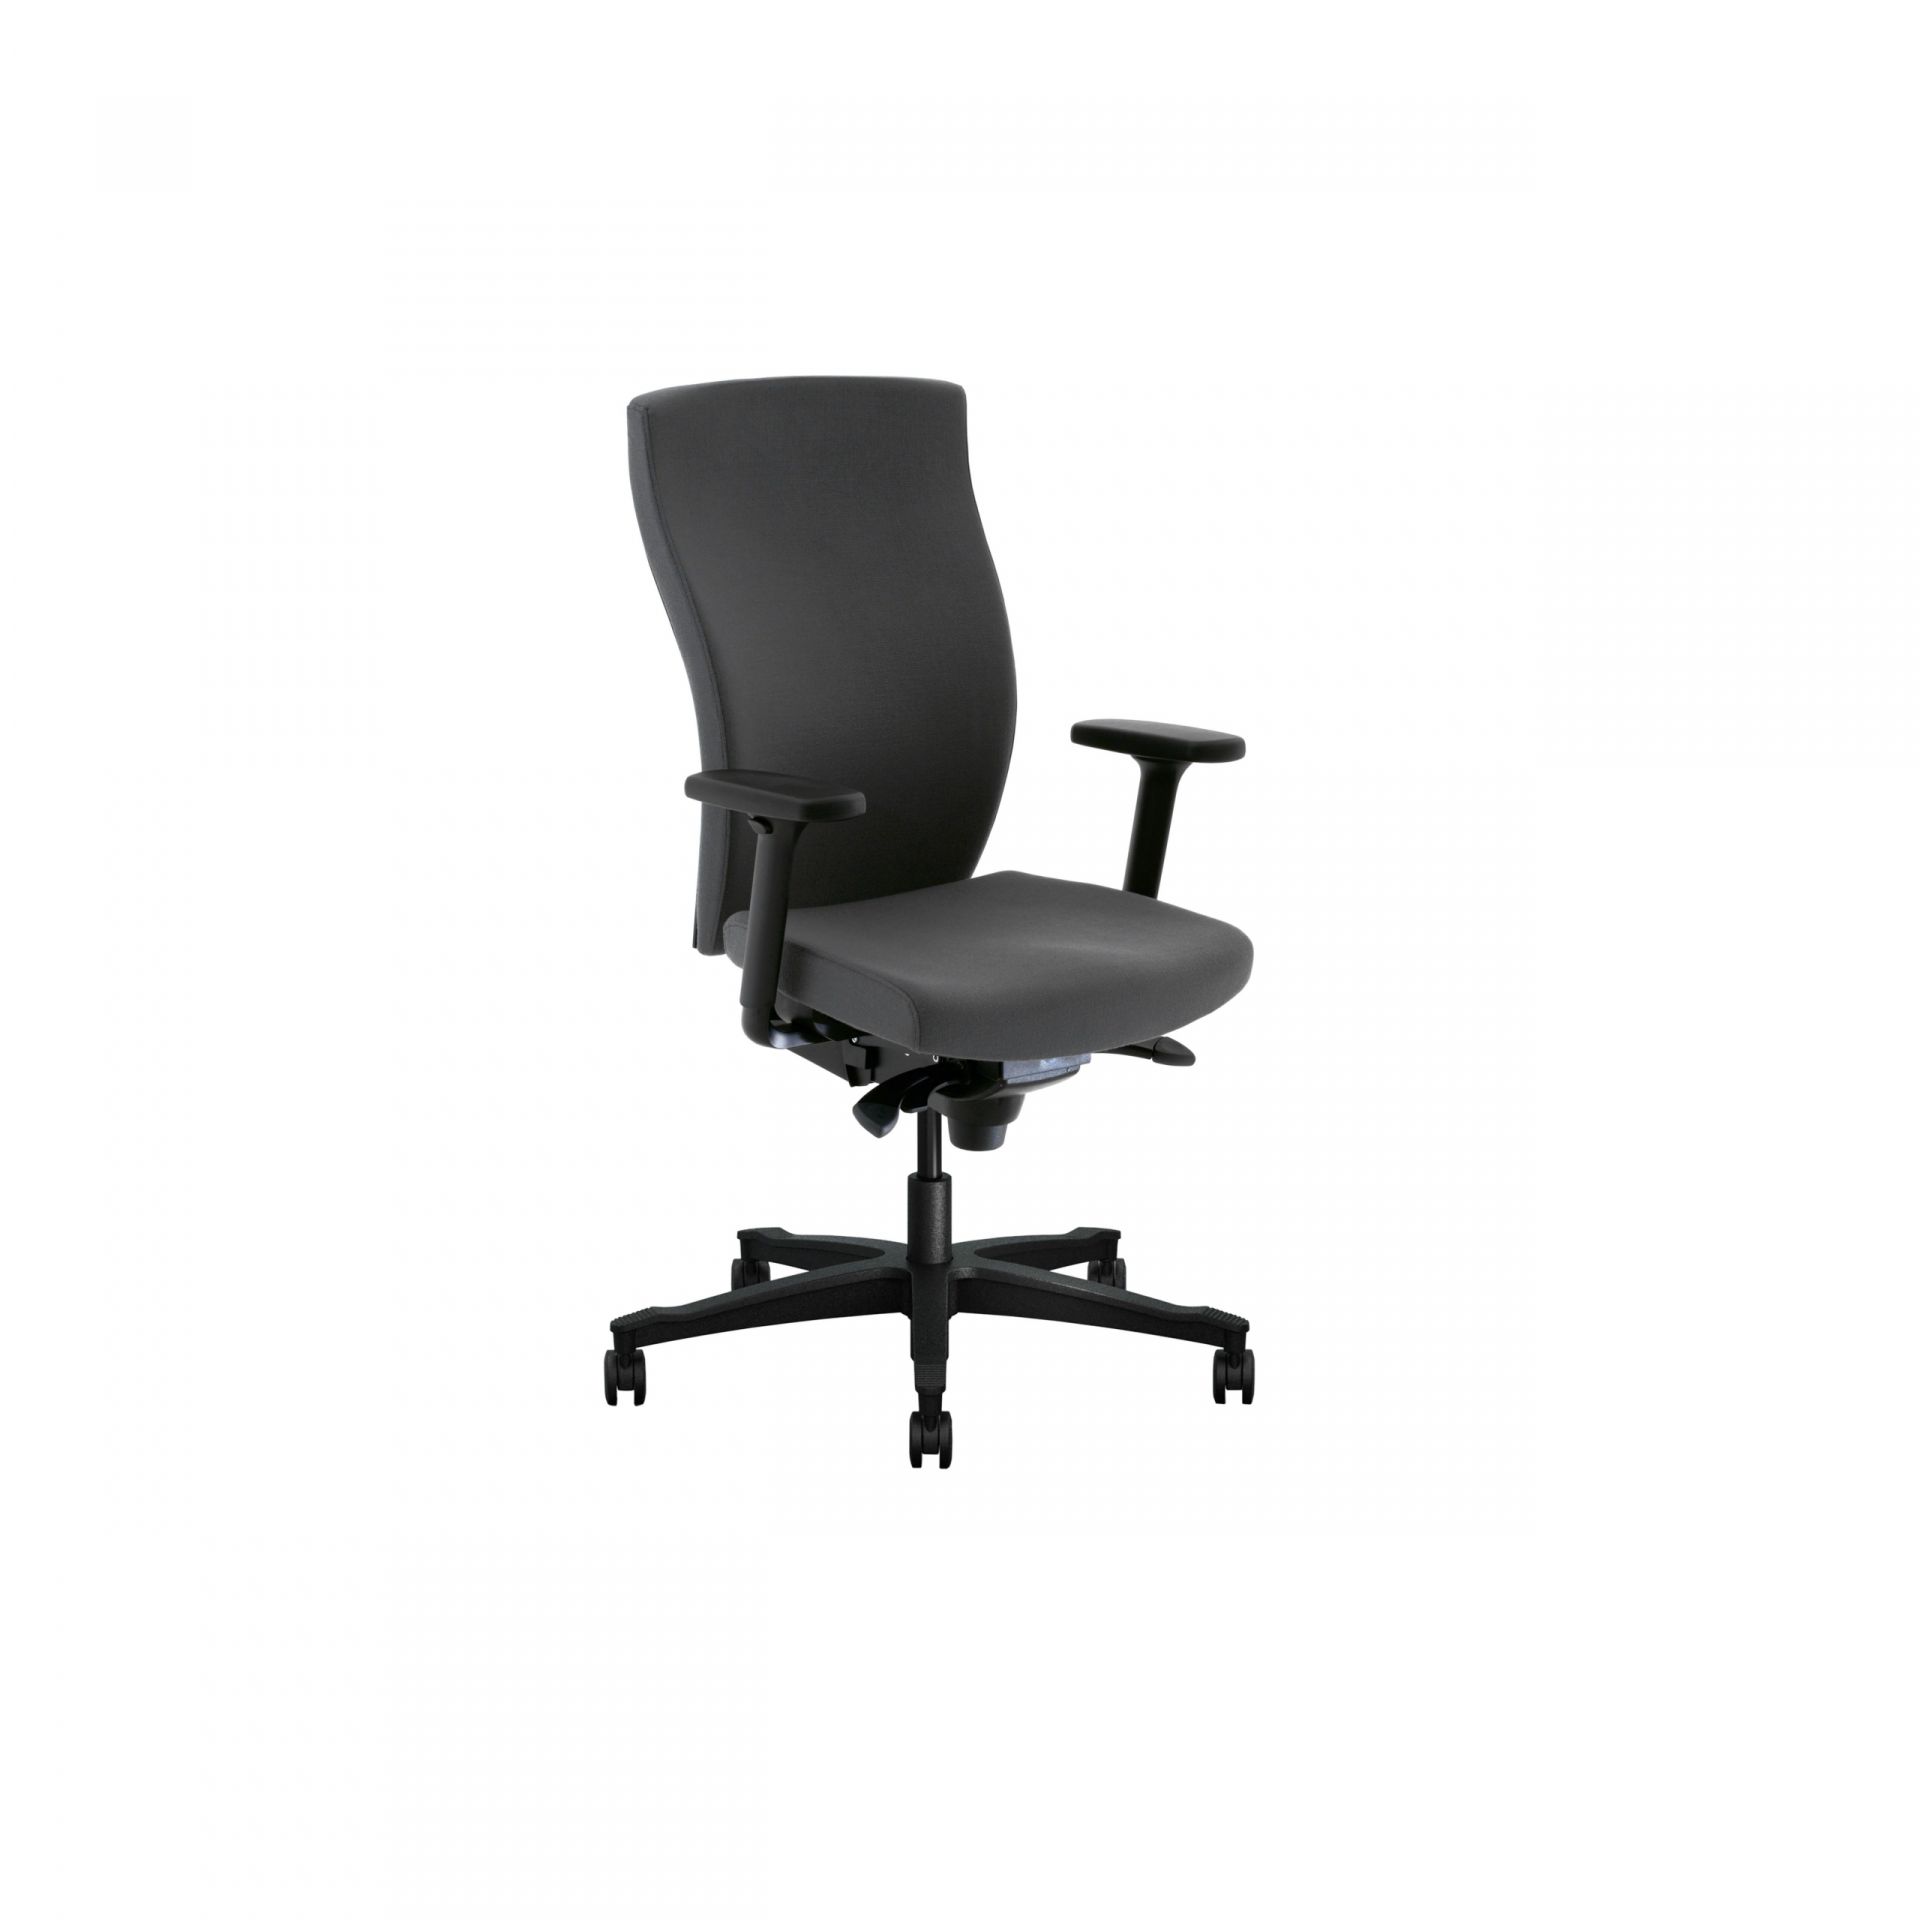 Splice Office chair with upholstered back